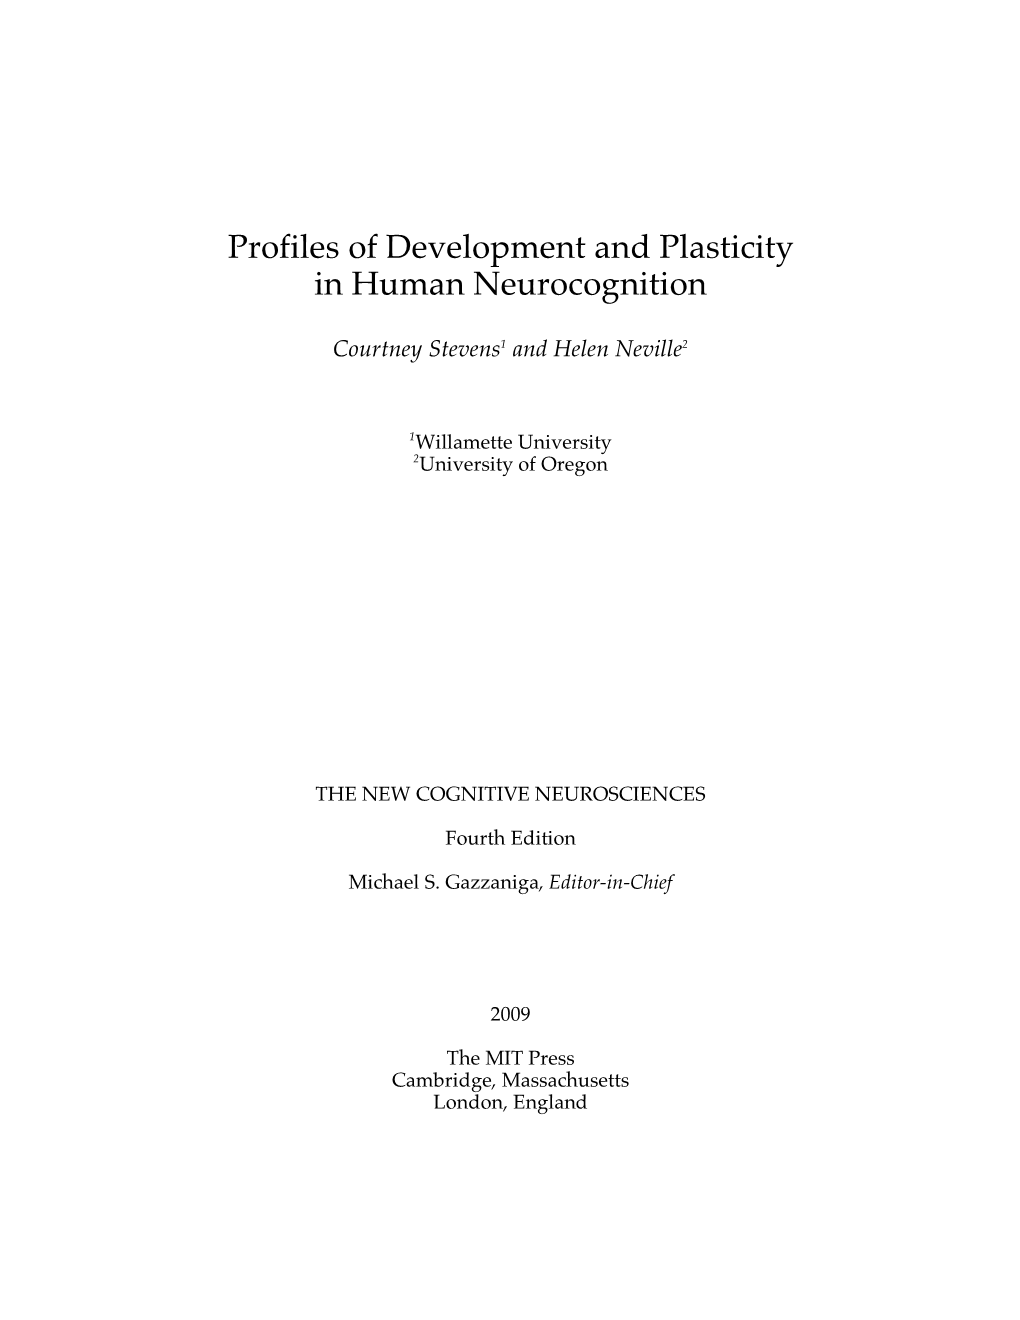 Profiles of Development and Plasticity in Human Neurocognition